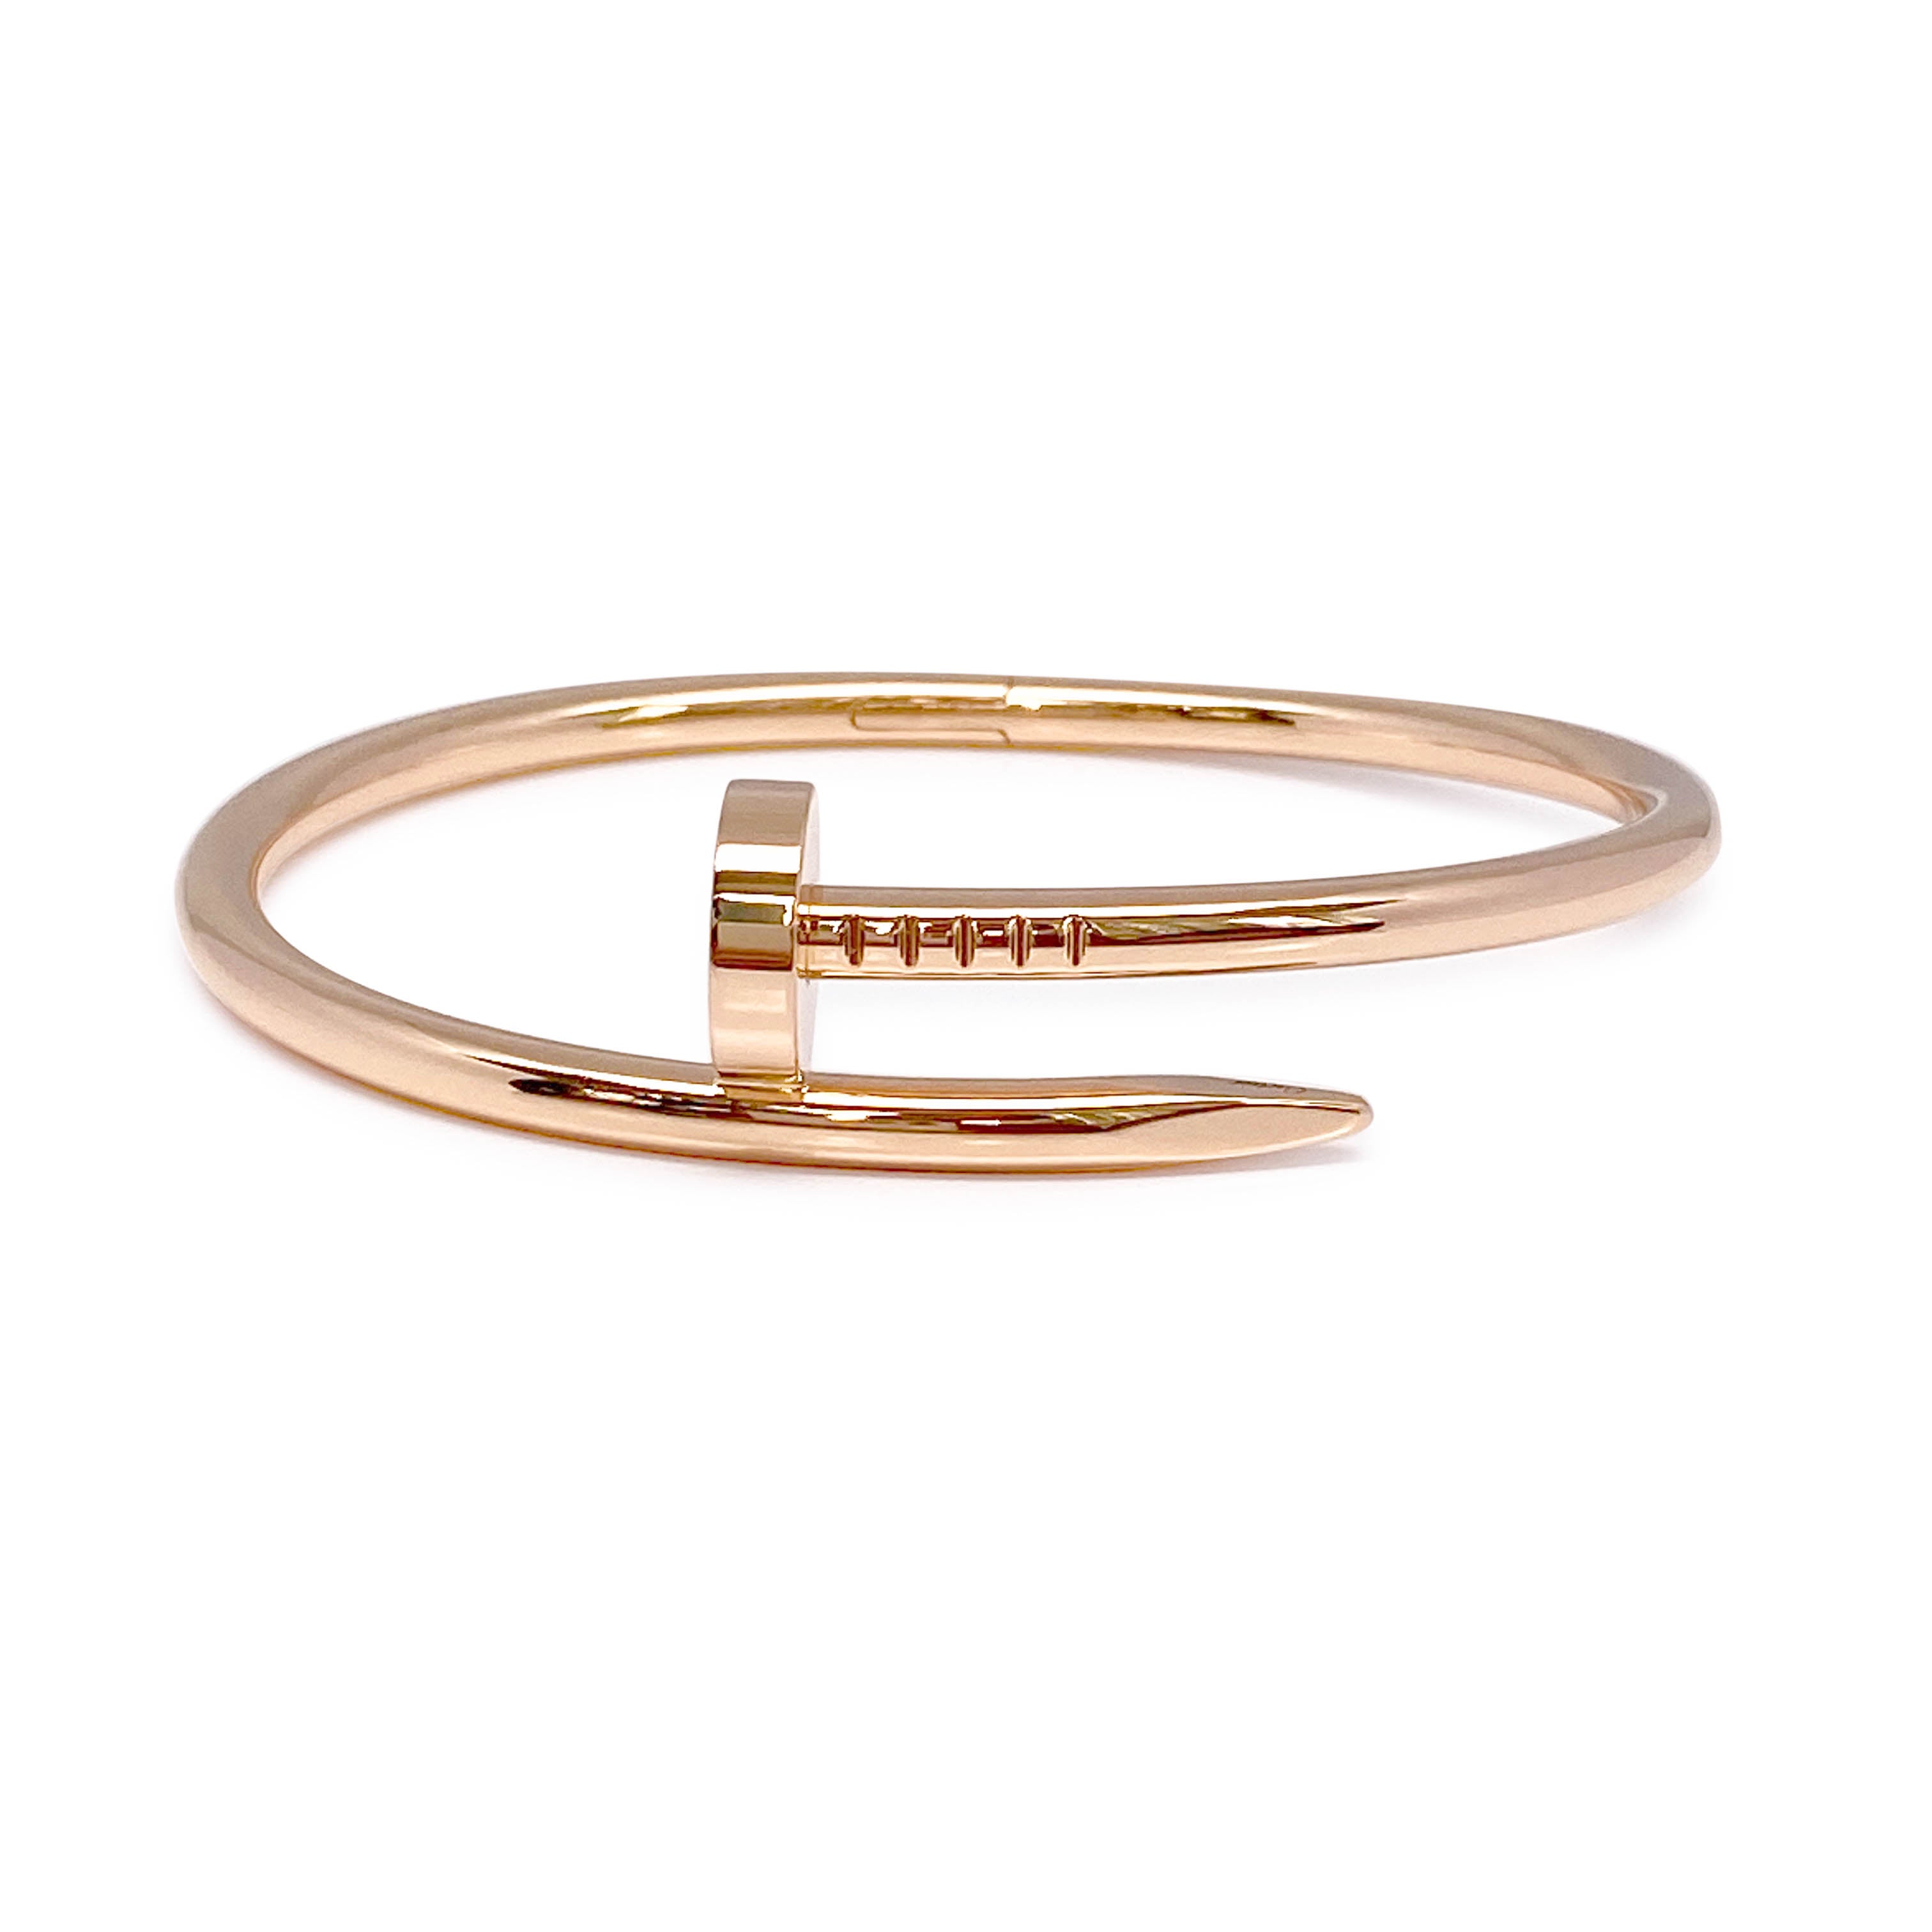 Cartier Juste un Clou (JUC) Nail Bracelet in Pink Gold (Medium model):  Details & Try-on 